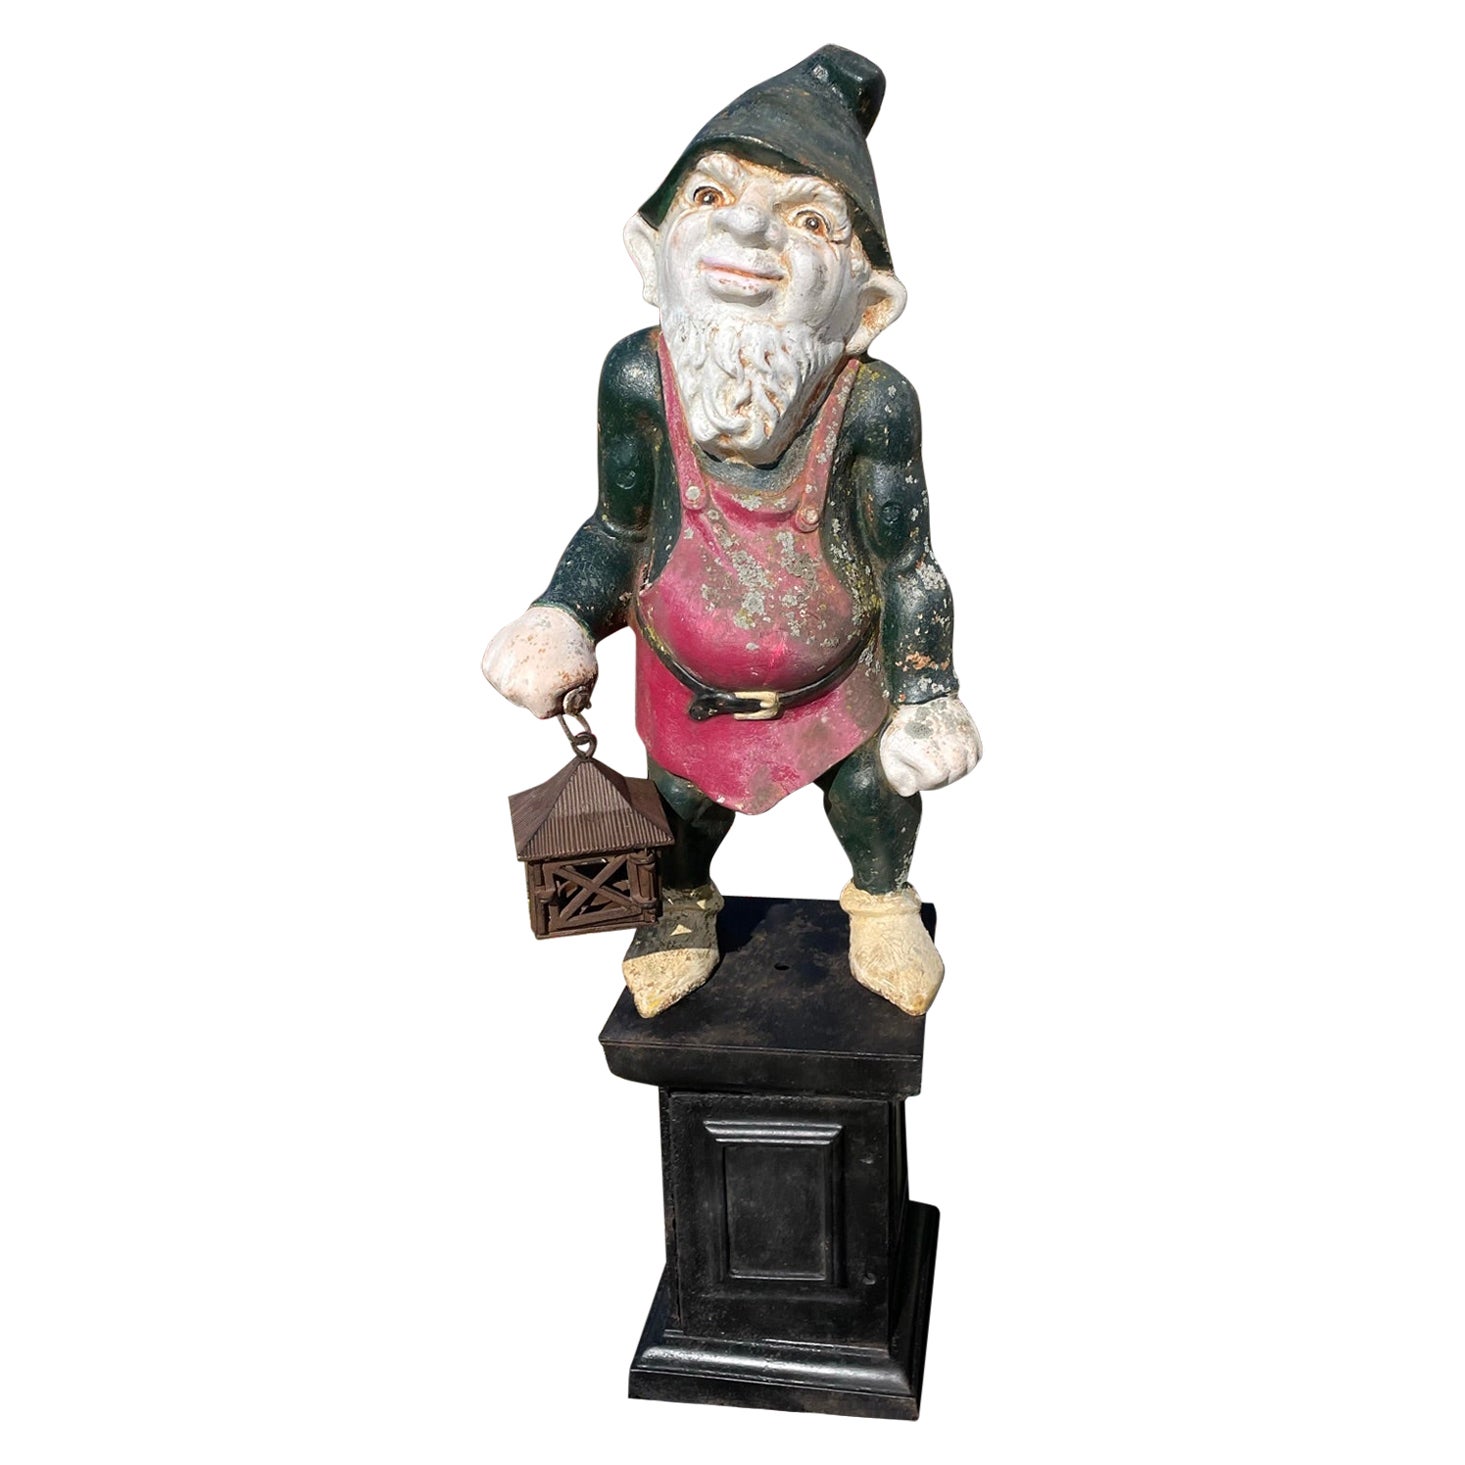 Rustic Cast Iron Gnome Figurine Paper Weight 3” 